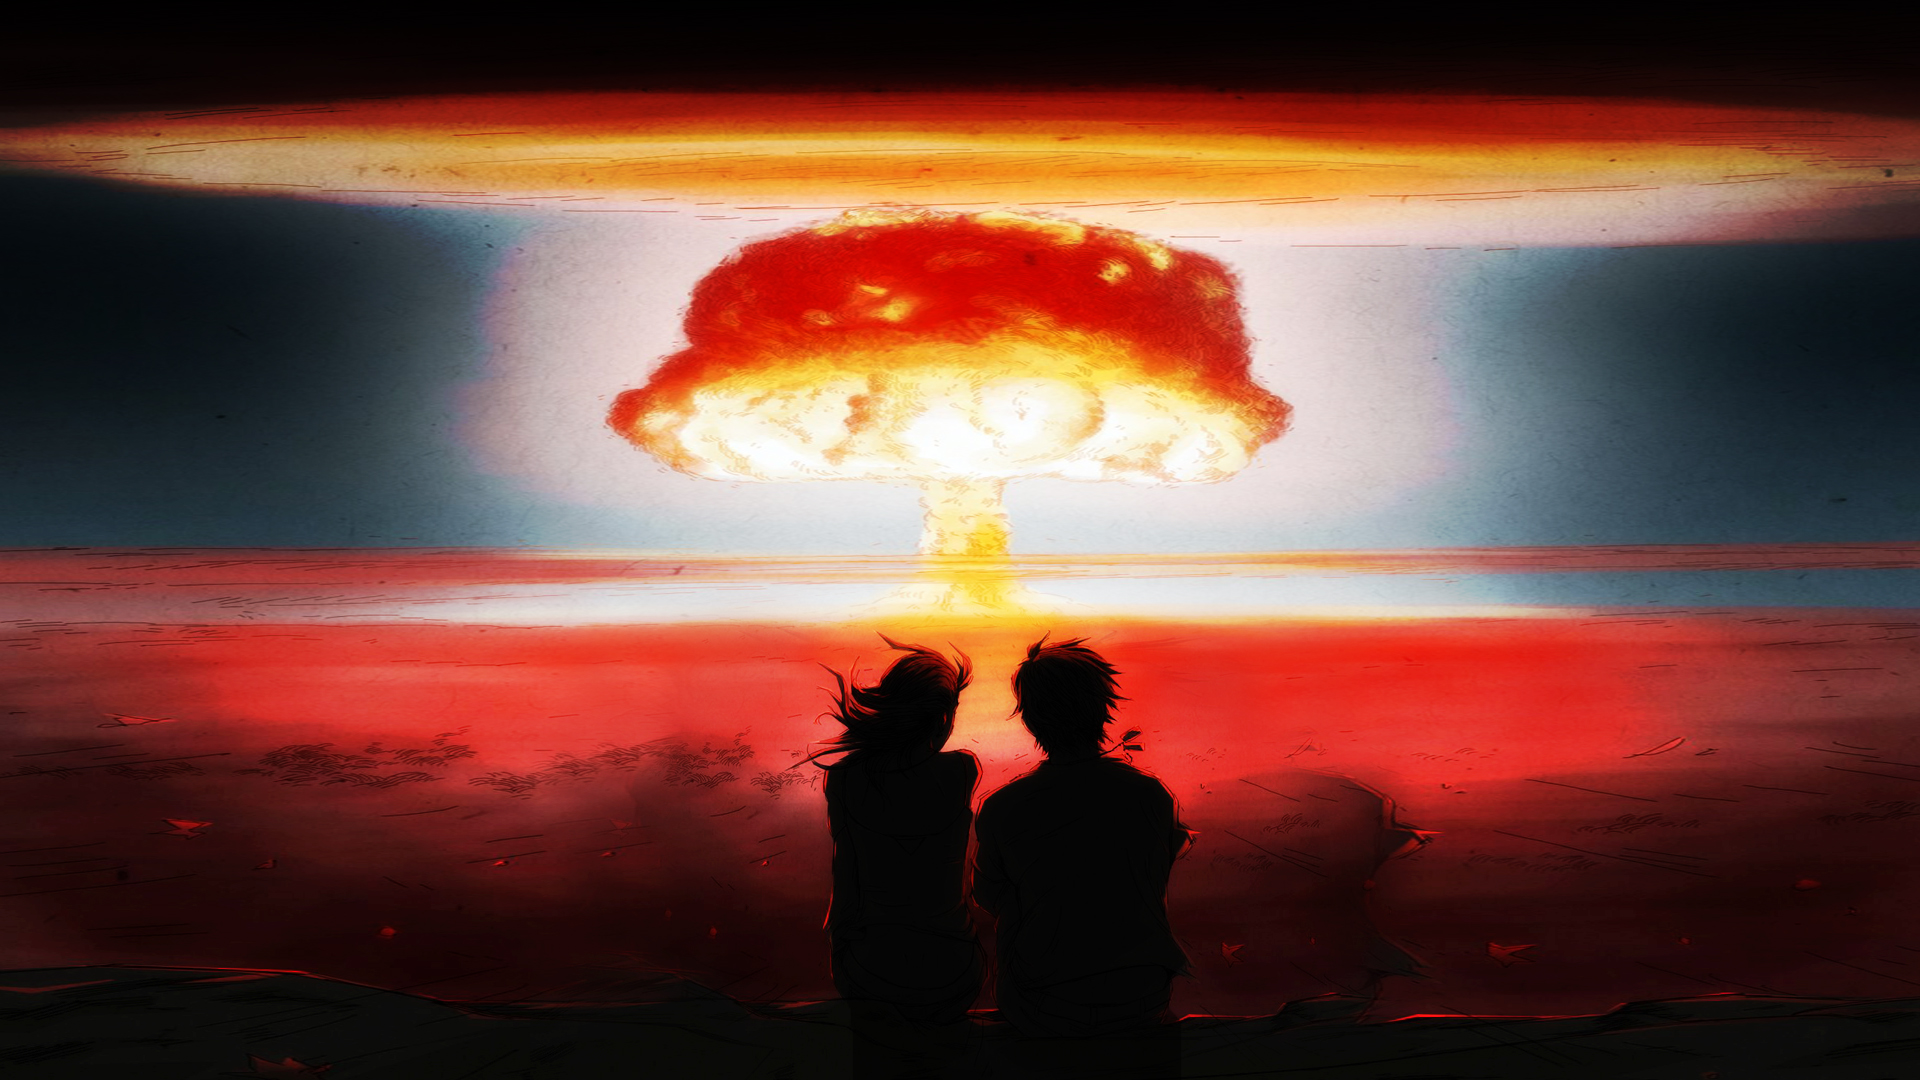 Nuclear Blast Bomb Explosion Anime Drawing Mushroom - Anime Nuclear Explosion , HD Wallpaper & Backgrounds